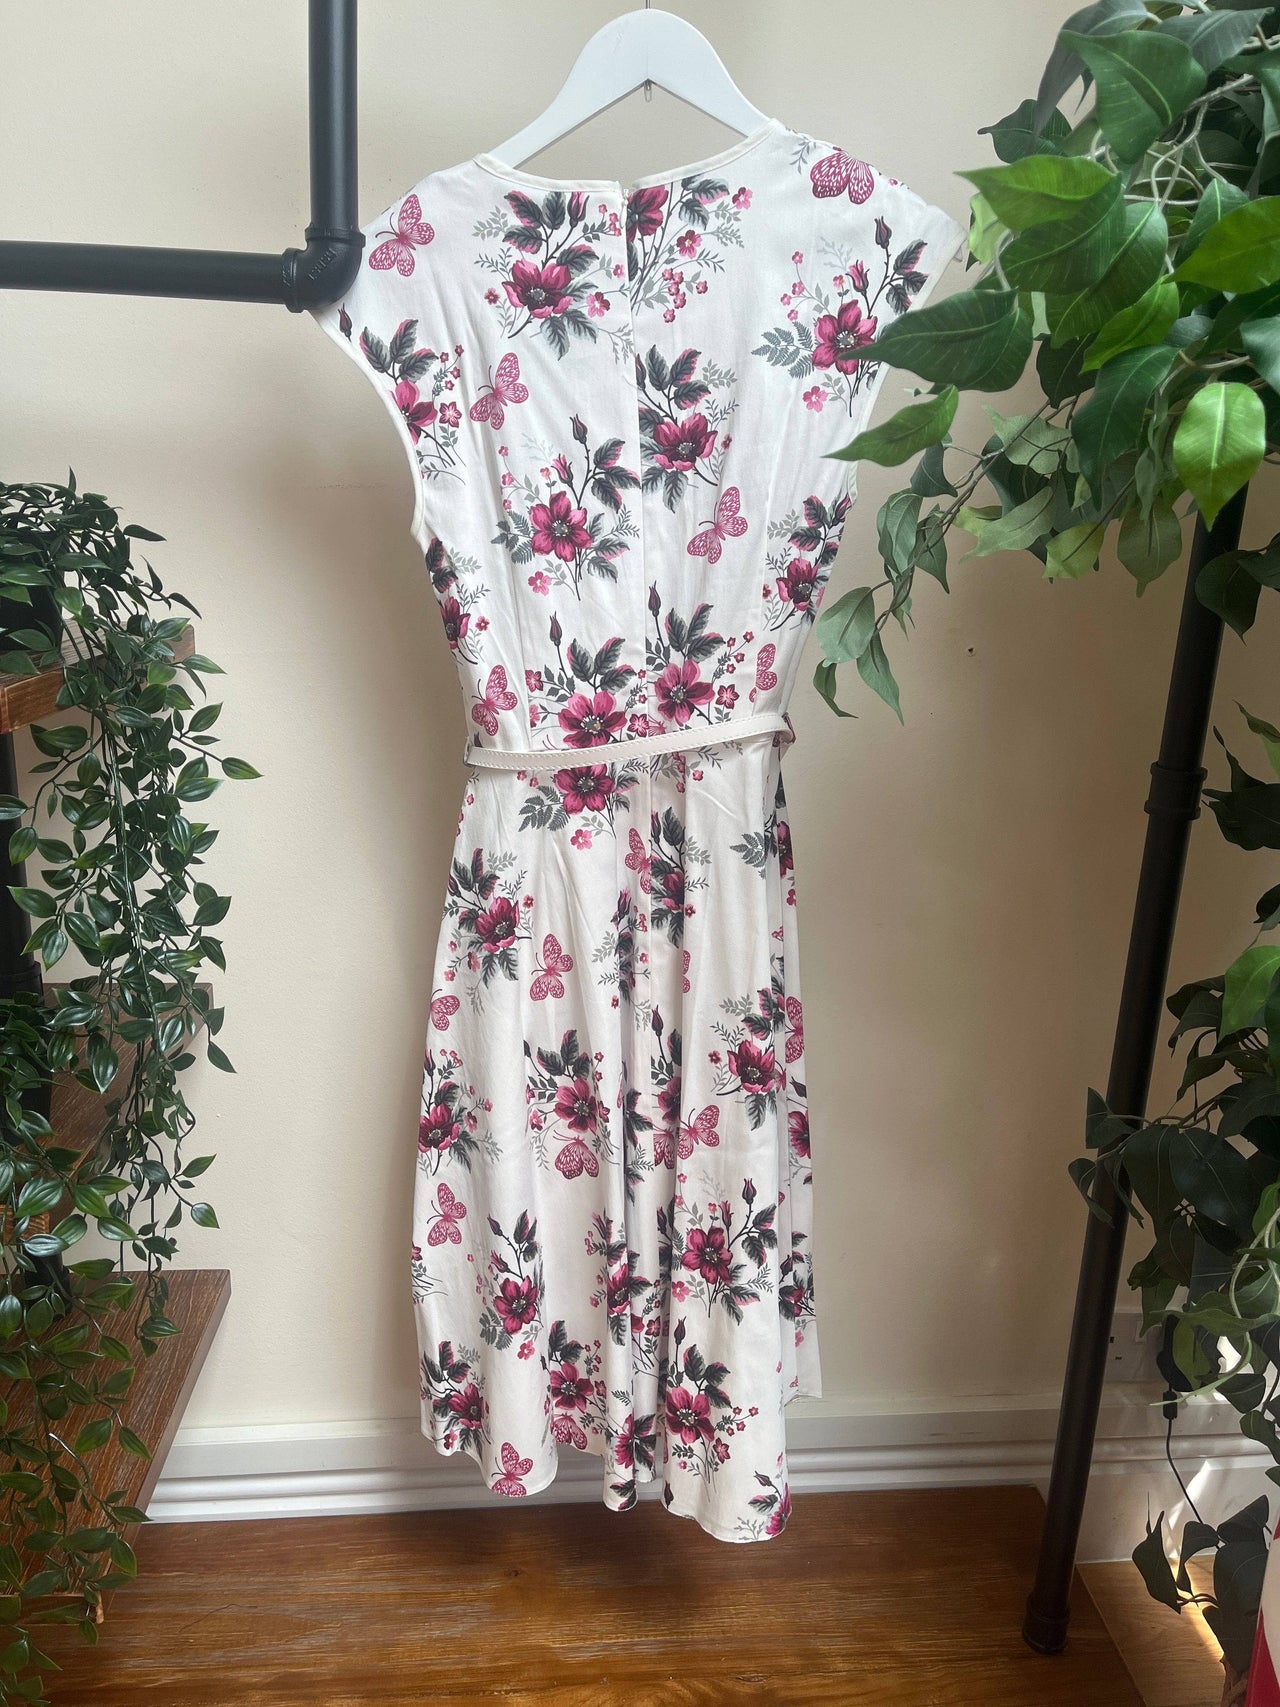 Isabella Dress - Pink Flowers on White (12) 12 Lady Vintage London Outlet